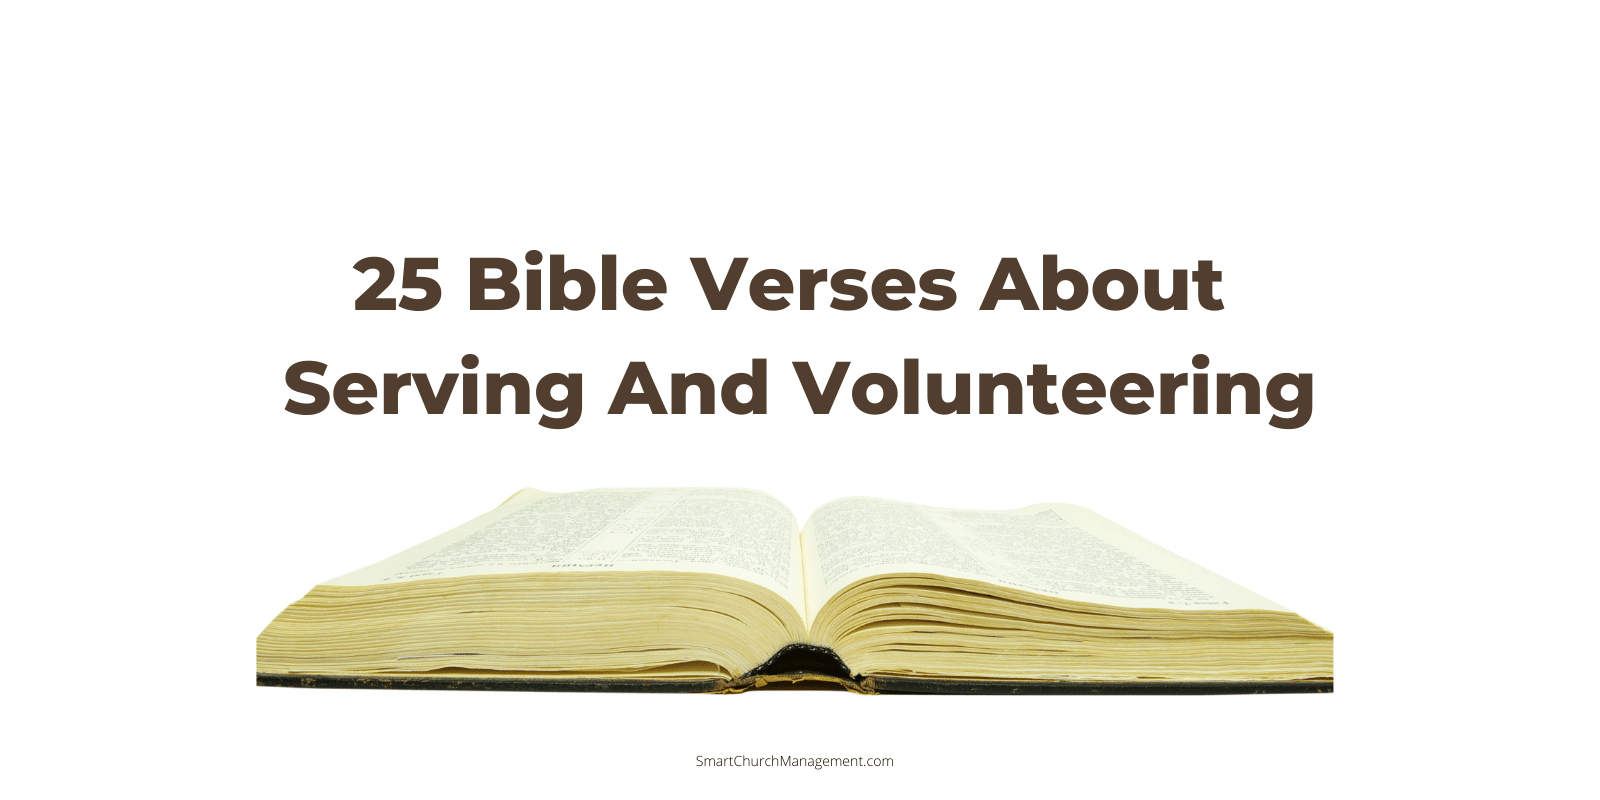 Bible verses about serving and volunteering